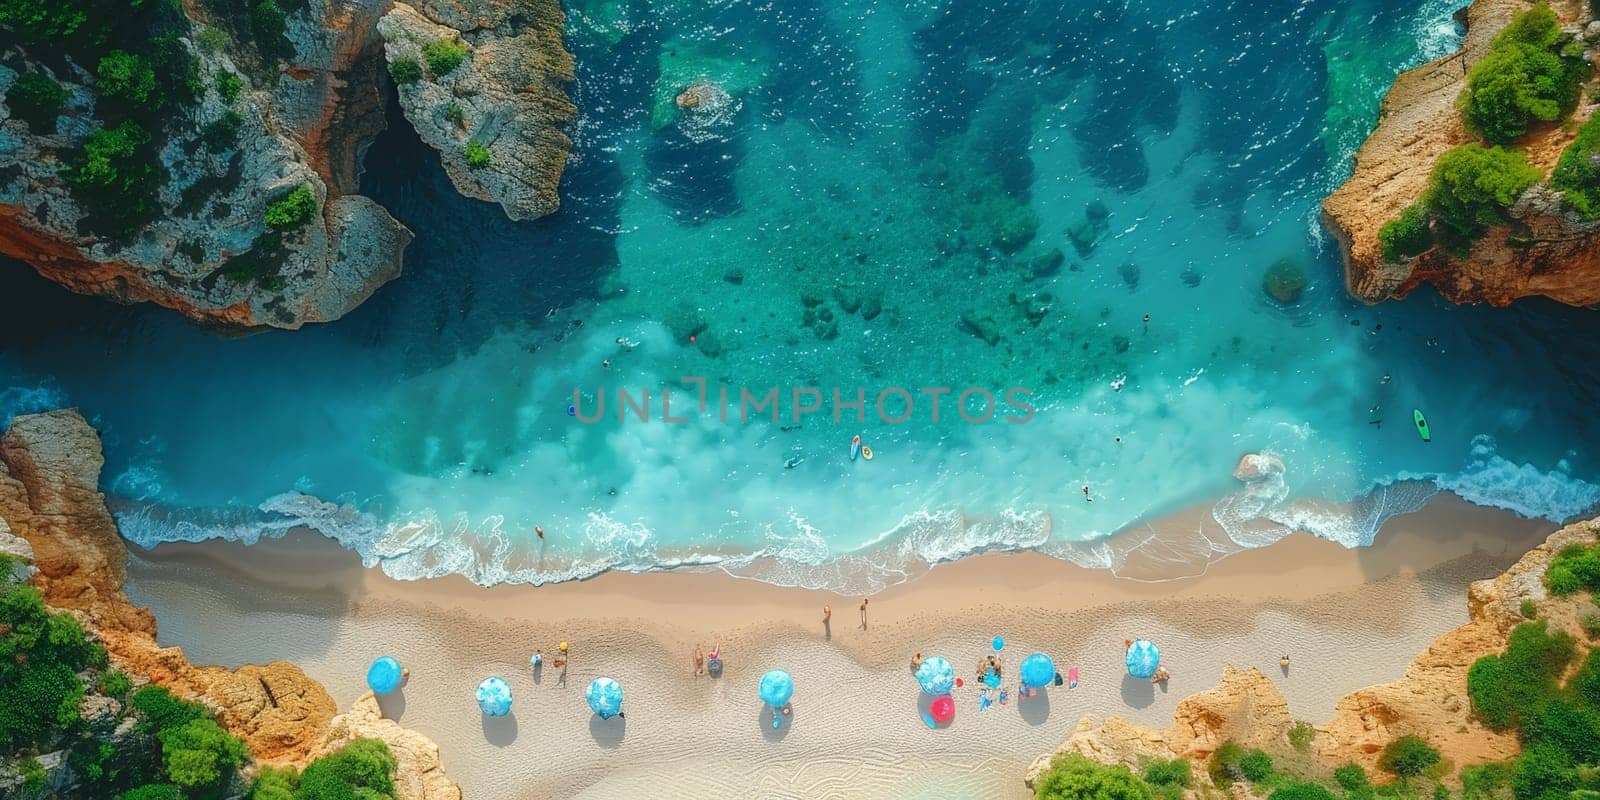 A beach with many people and umbrellas. The beach is very crowded and the water is very clear